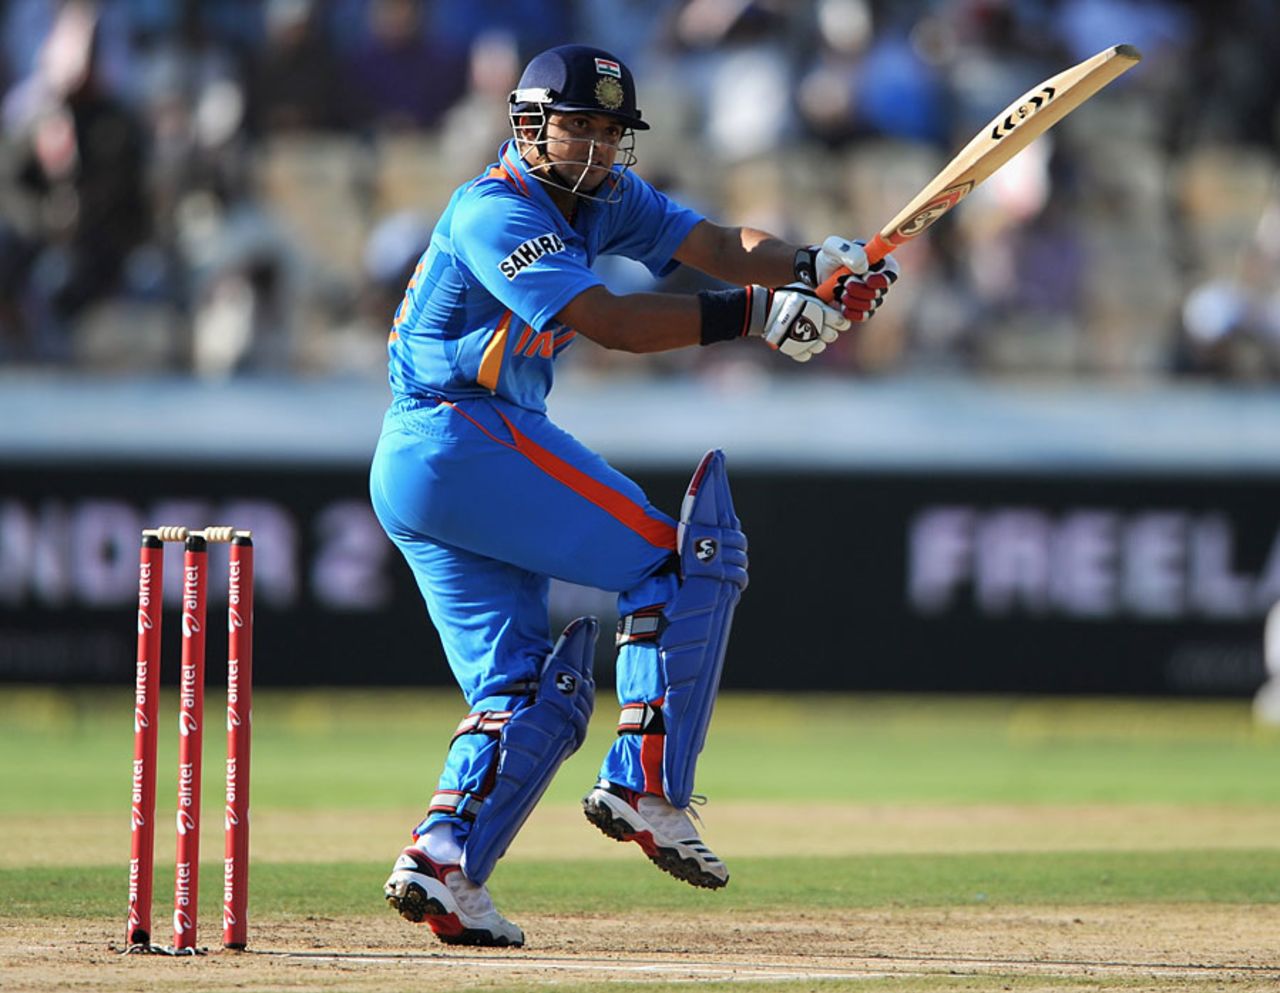 Suresh Raina hit his stride with an important half century, India v England, 1st ODI, Hyderabad, October 14, 2011